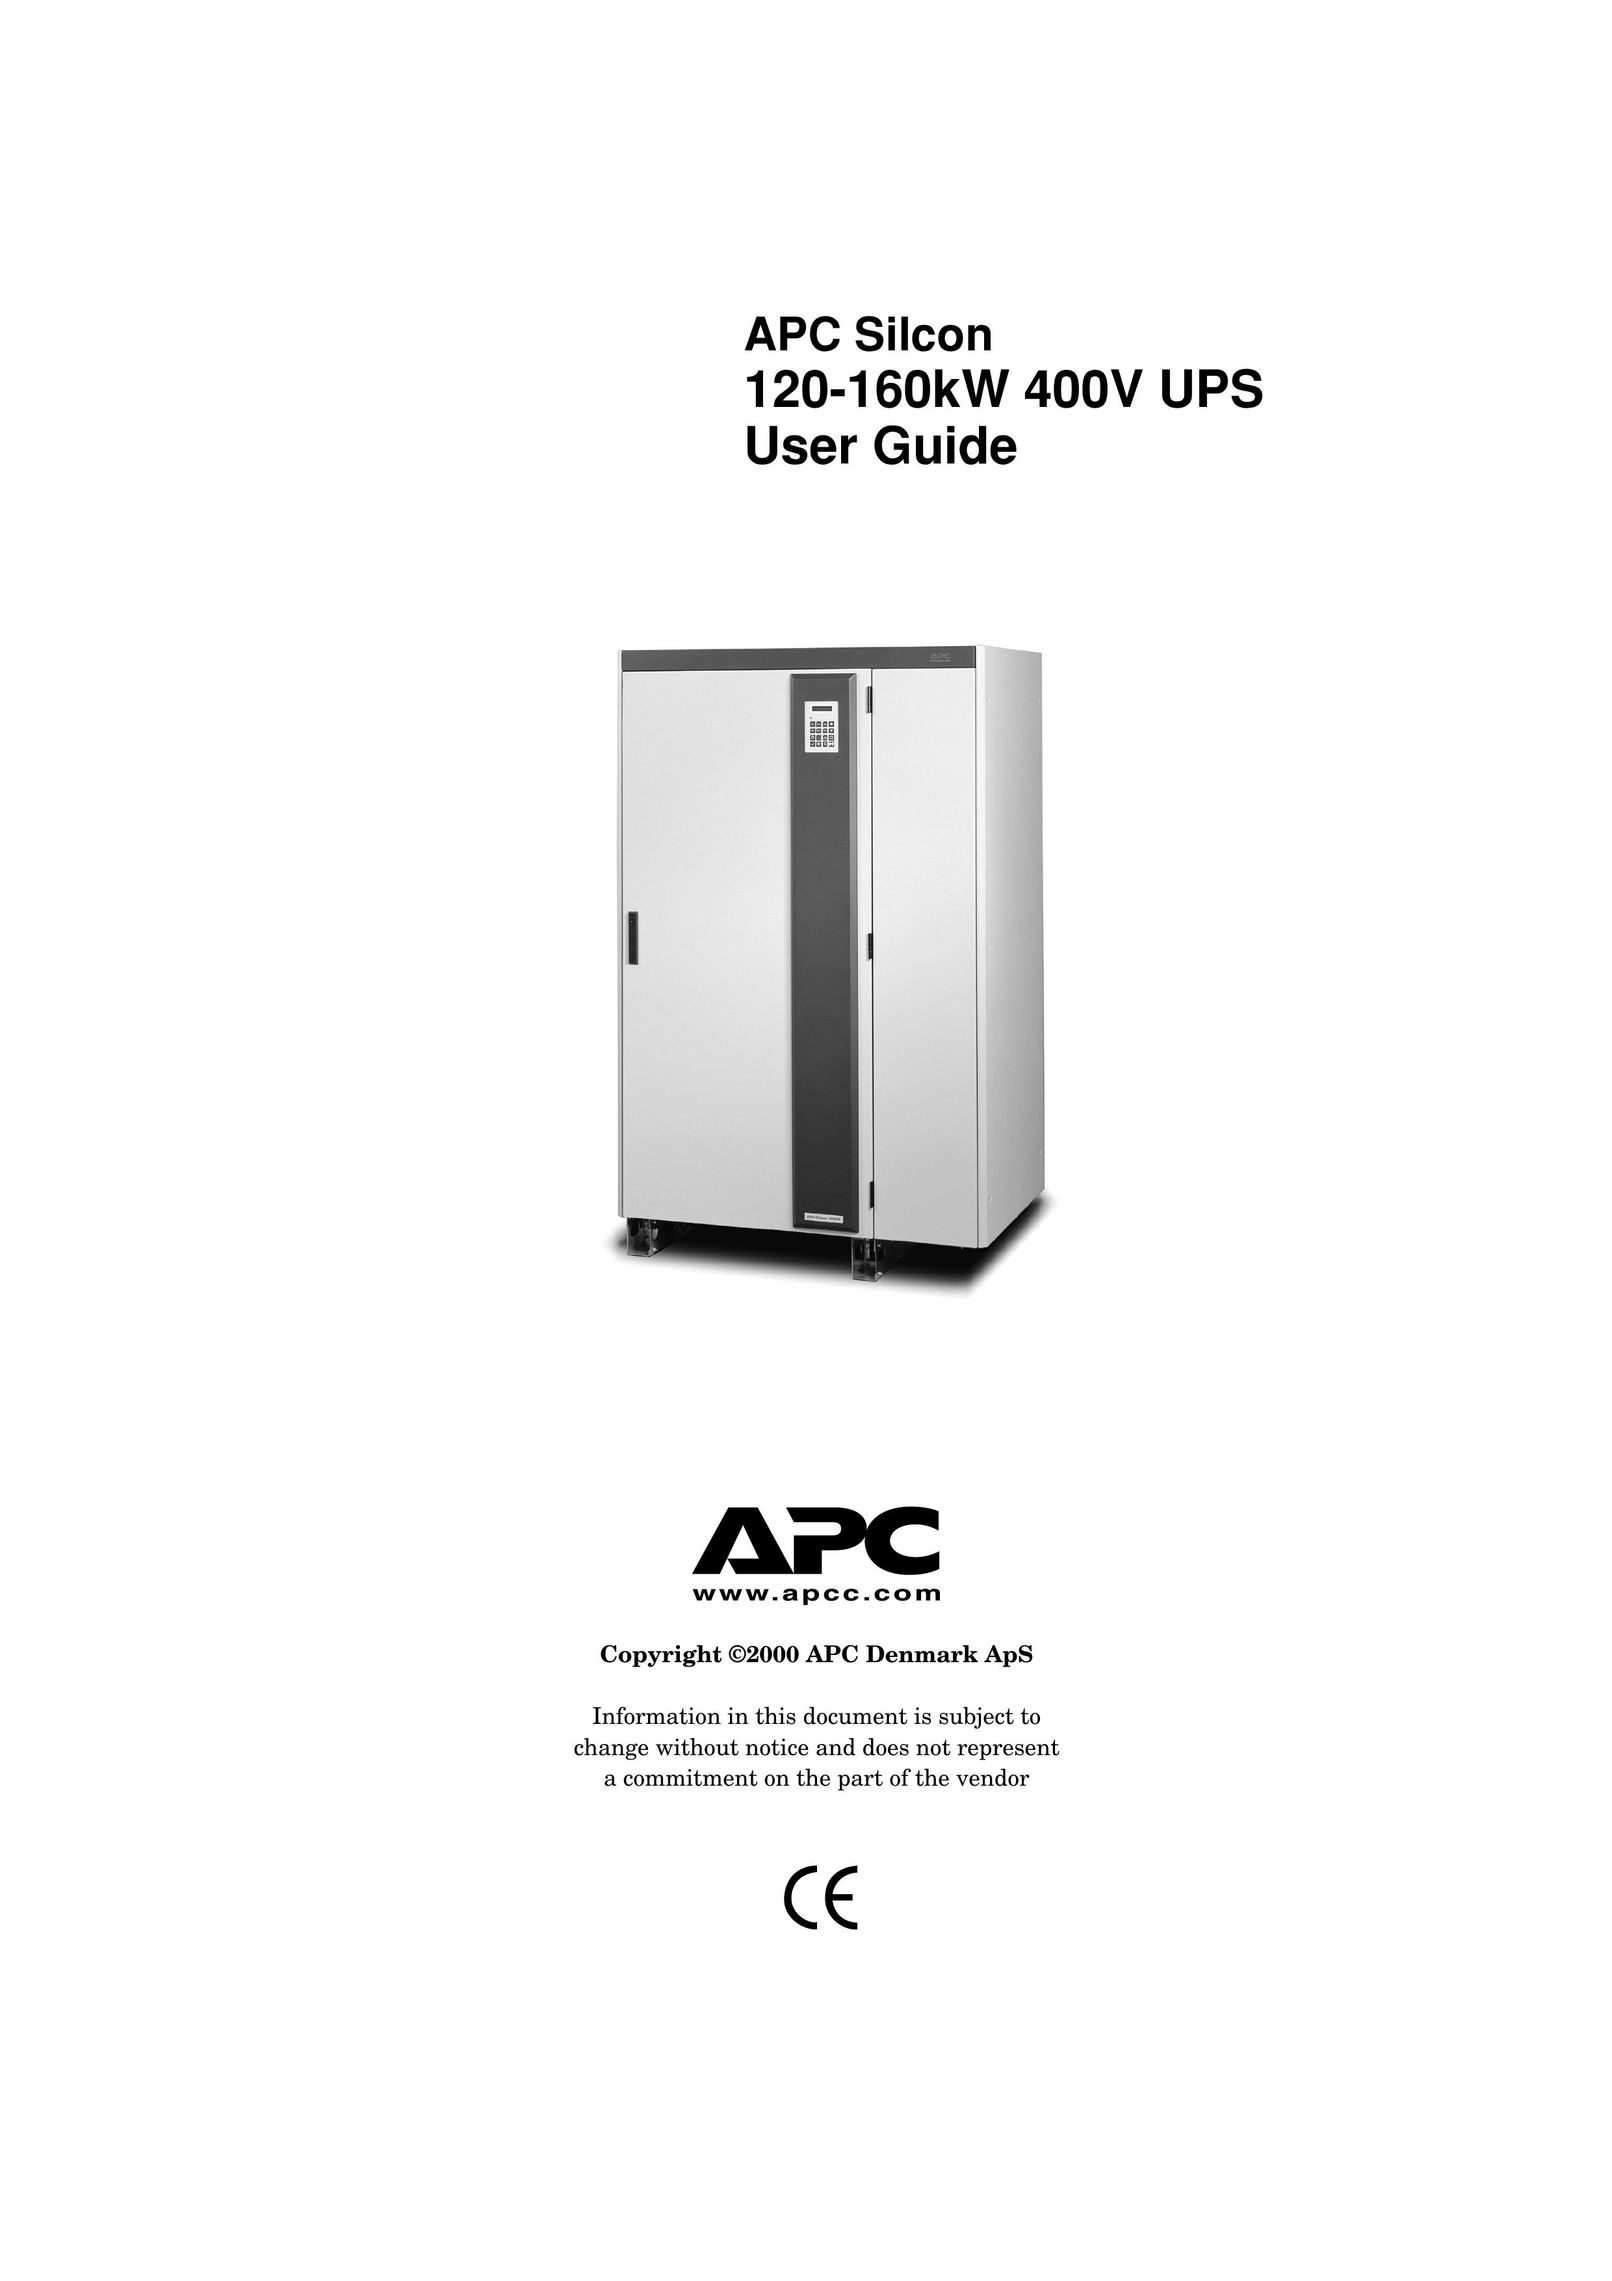 American Power Conversion 120-160kW Power Supply User Manual